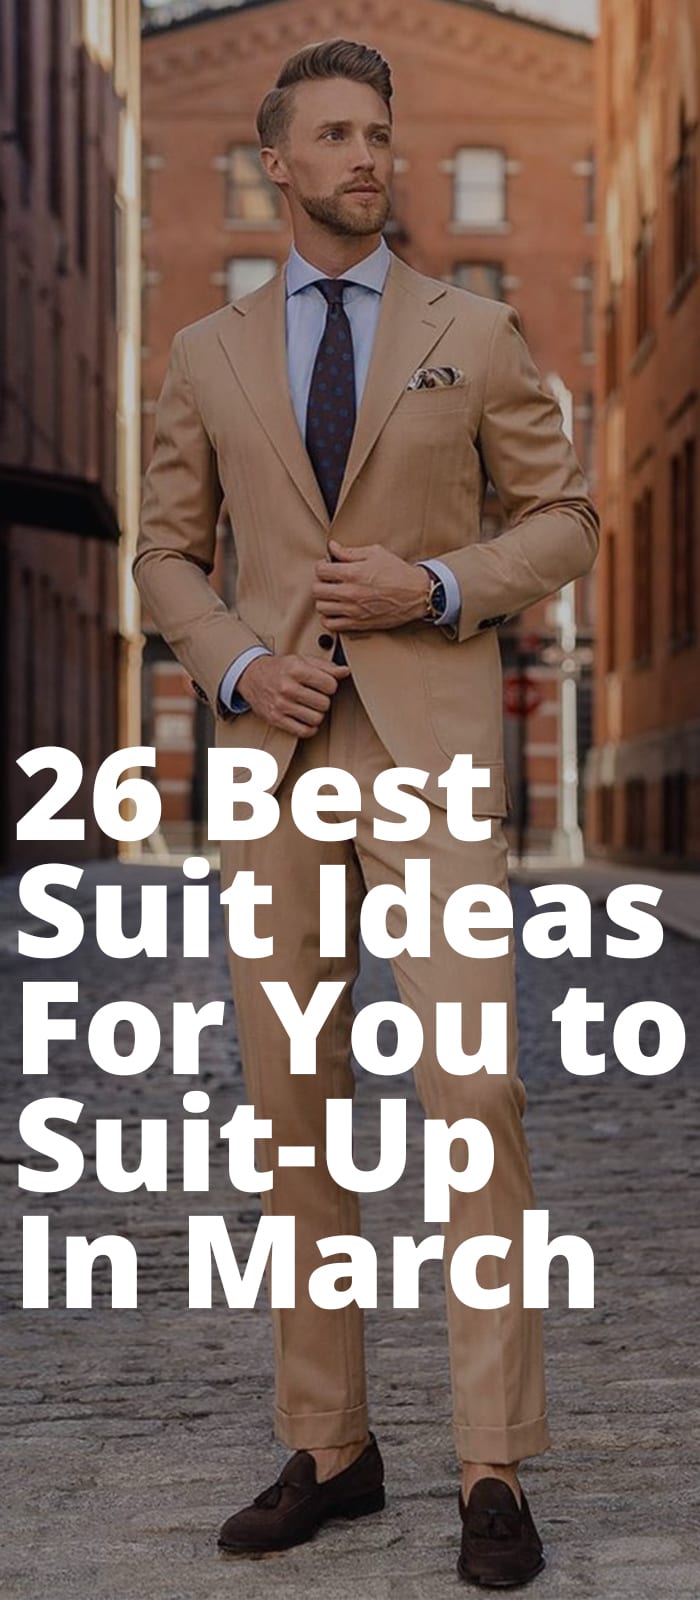 26 Best Suit Ideas for you to Suit Up